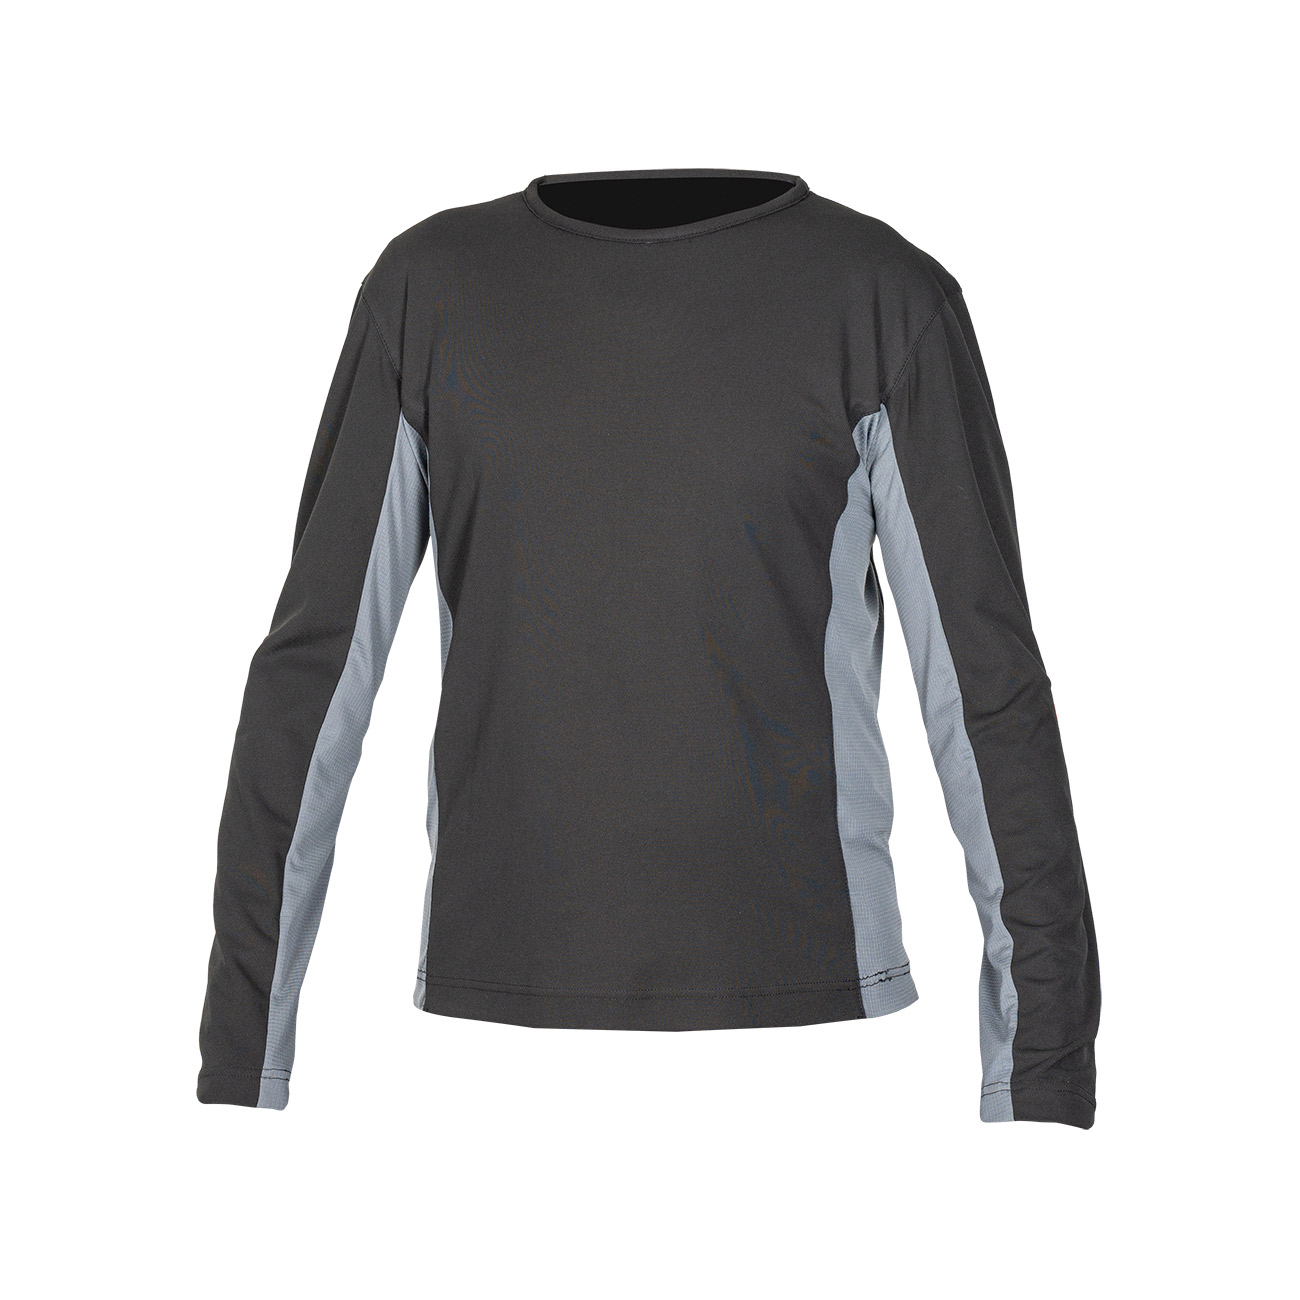 Cool layer functional long sleeve